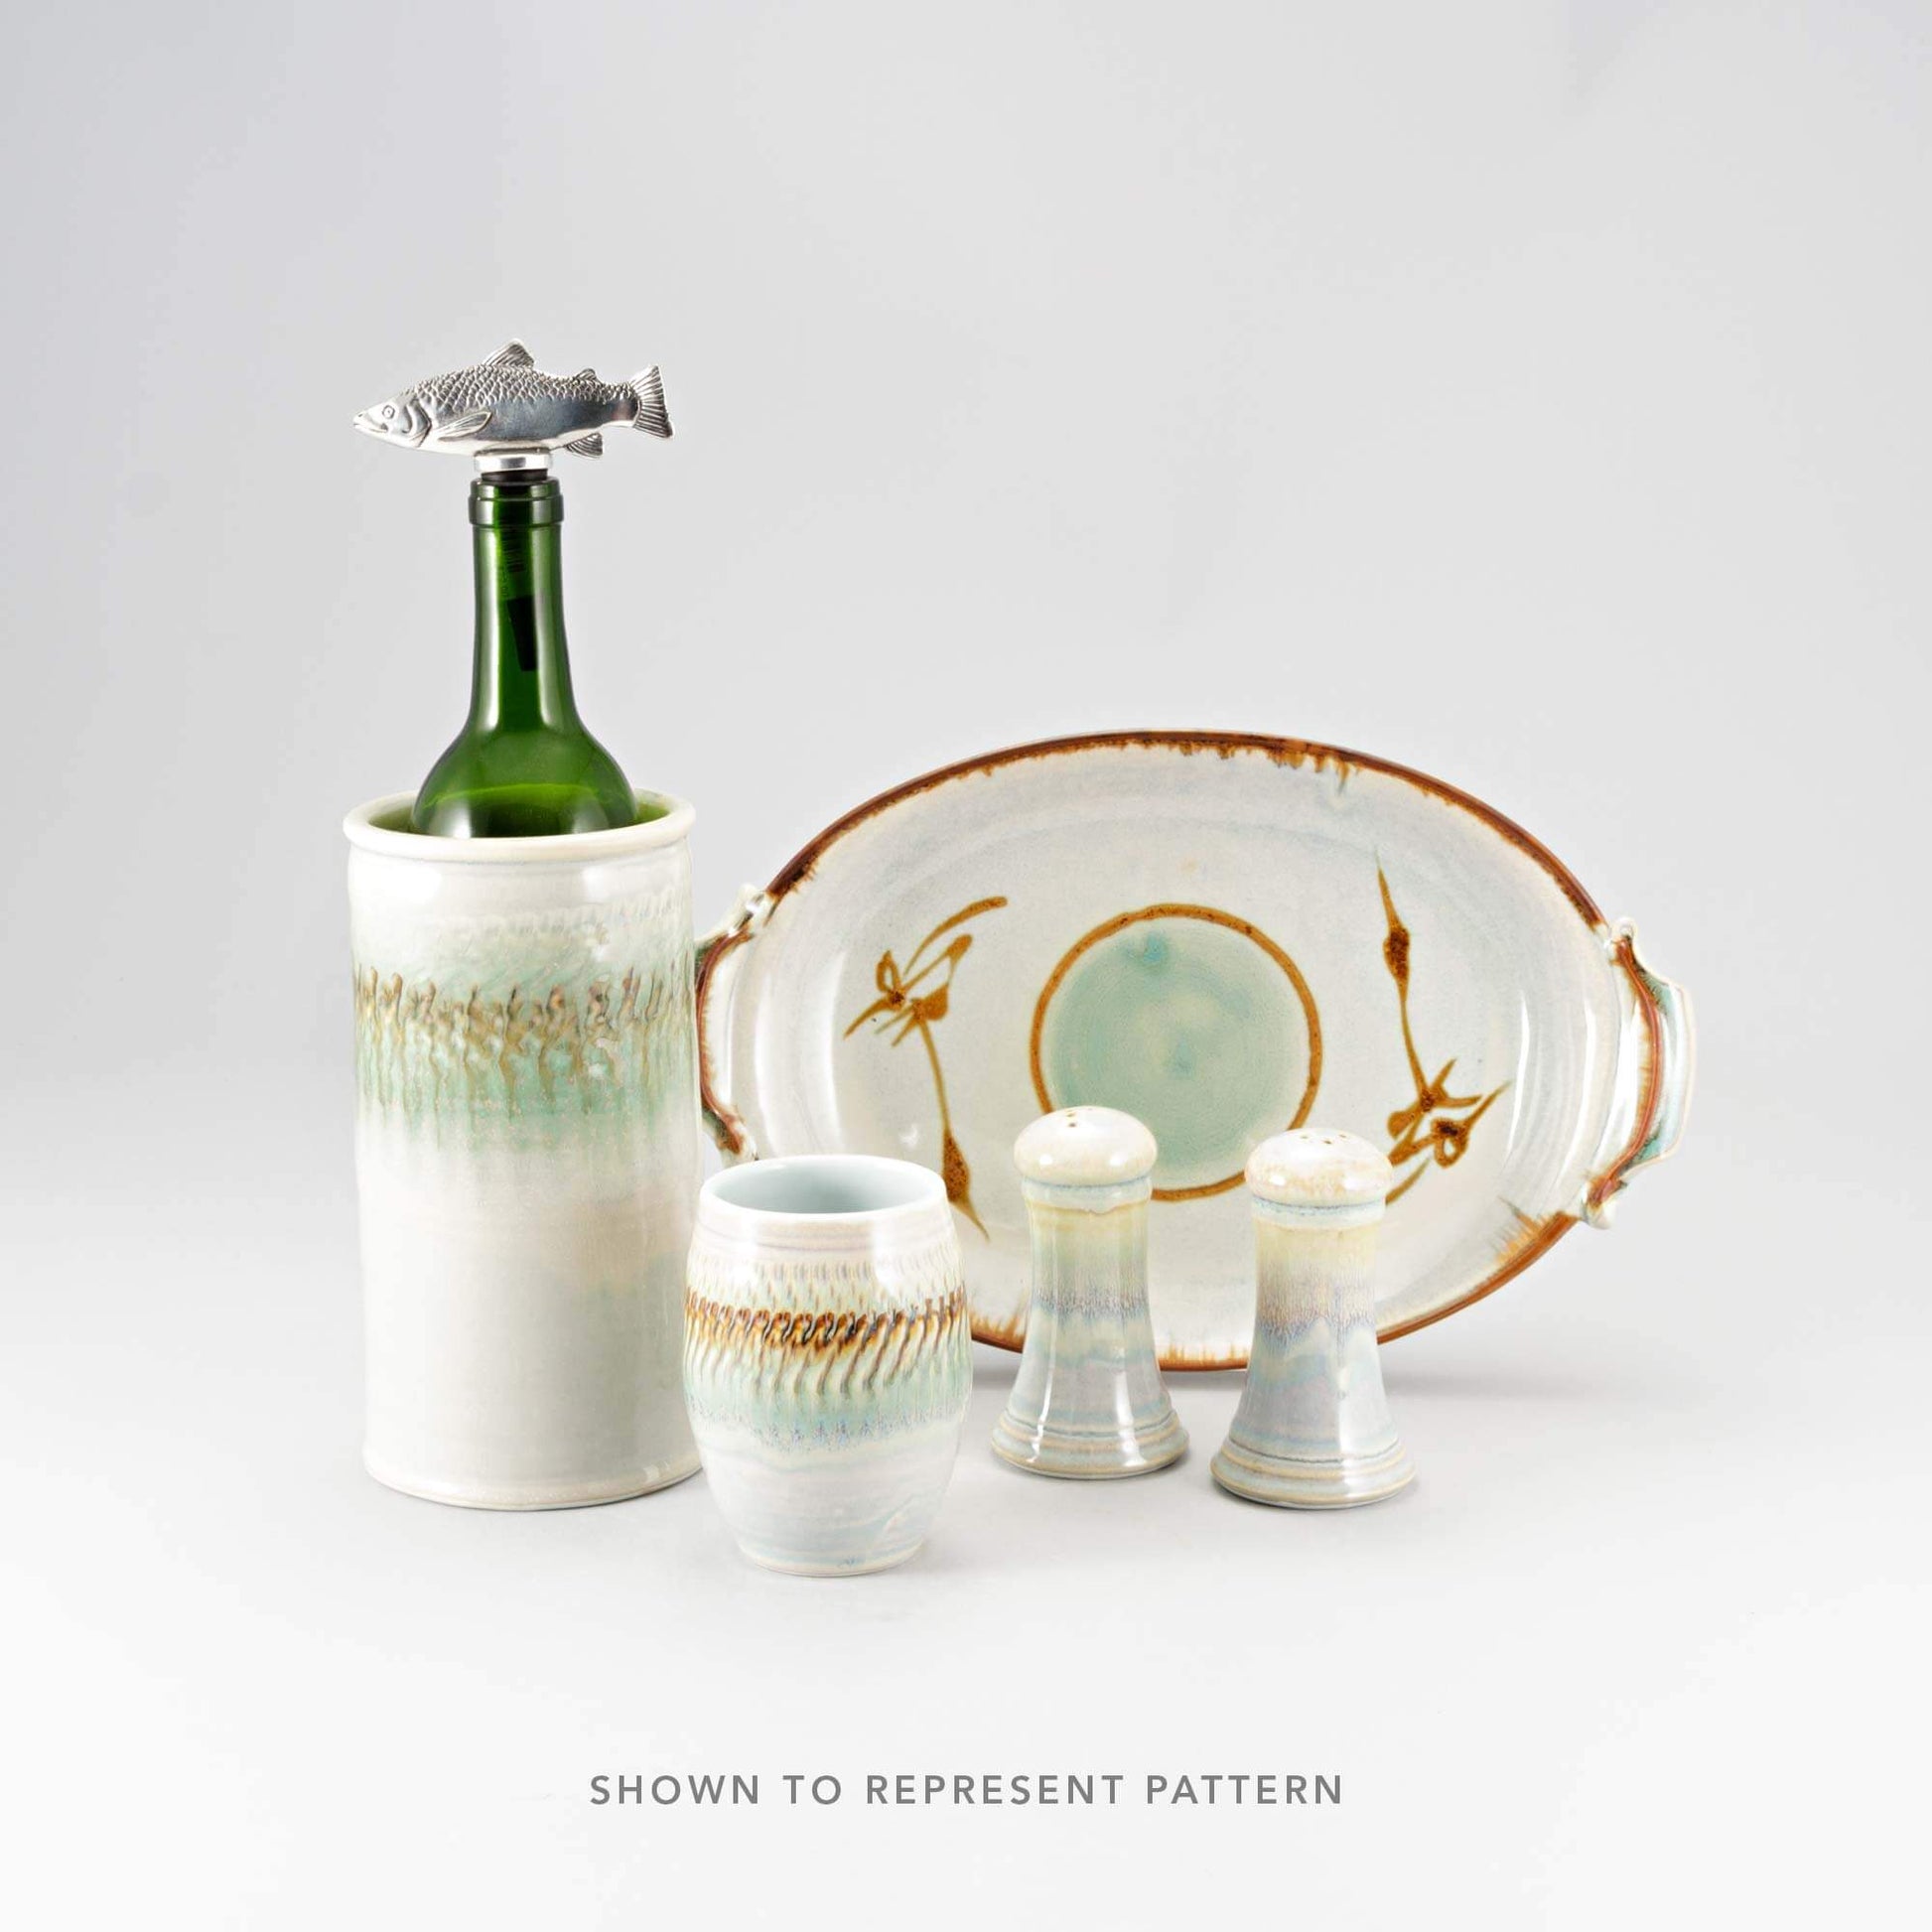 Handmade Pottery Bottle Hummingbird Feeder in Ivory & Green pattern made by Georgetown Pottery in Maine